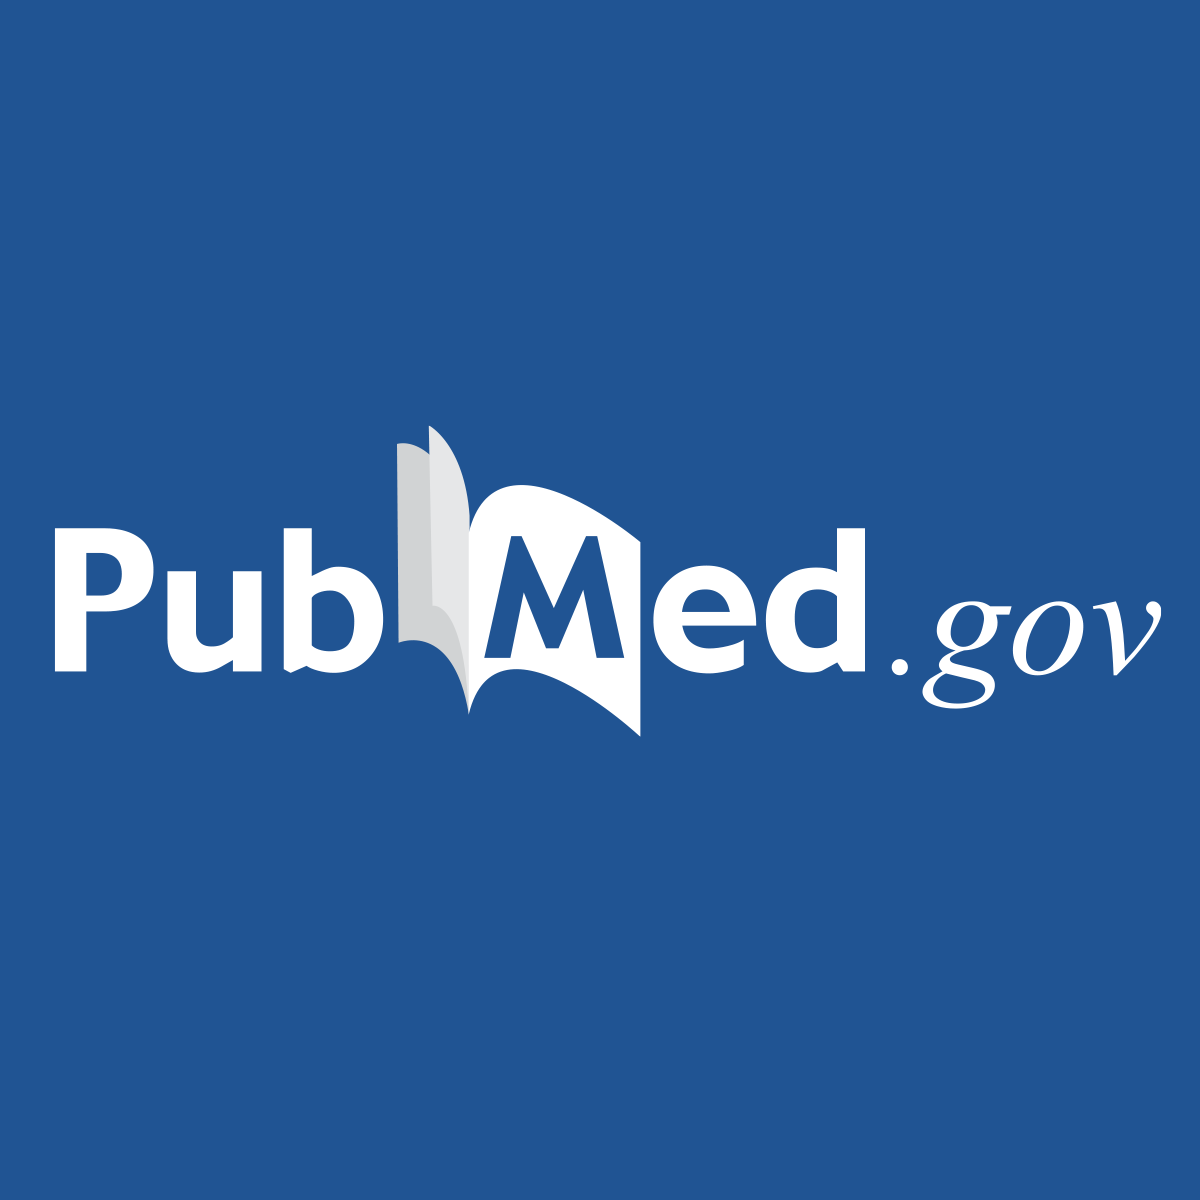 Phase II trial of nanoparticle albumin-bound paclitaxel as second-line chemotherapy for unresectable or recurrent gastric cancer - PubMed